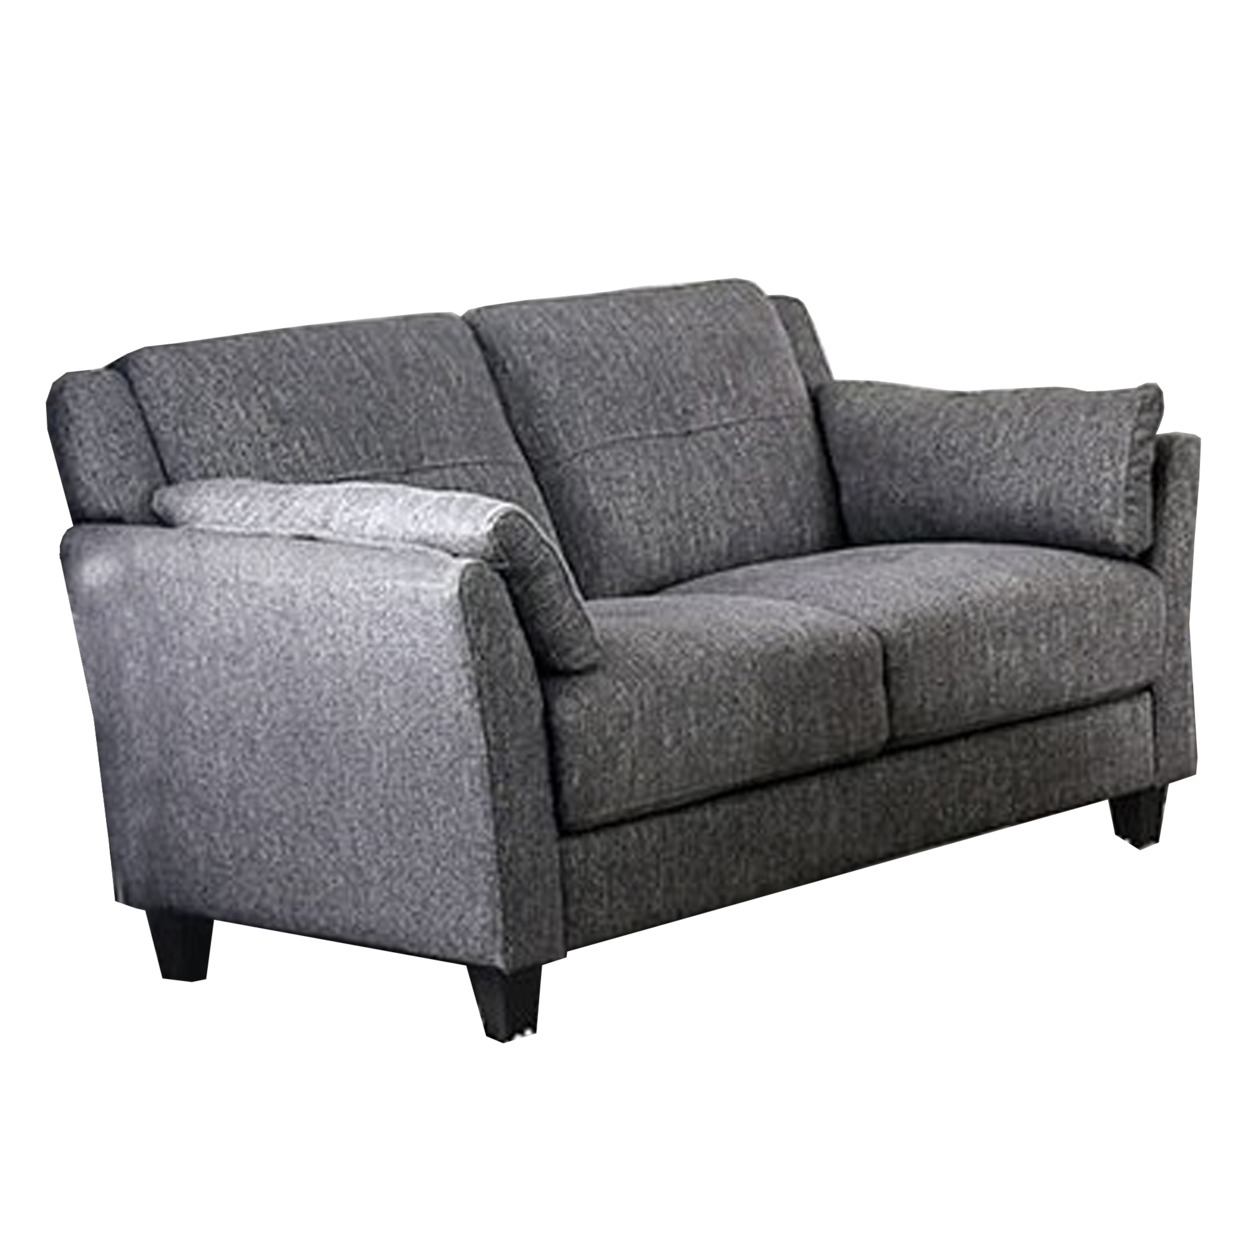 Contemporary Style Linen Like Fabric Upholstered Wooden Love Seat With Tapered Legs, Gray- Saltoro Sherpi